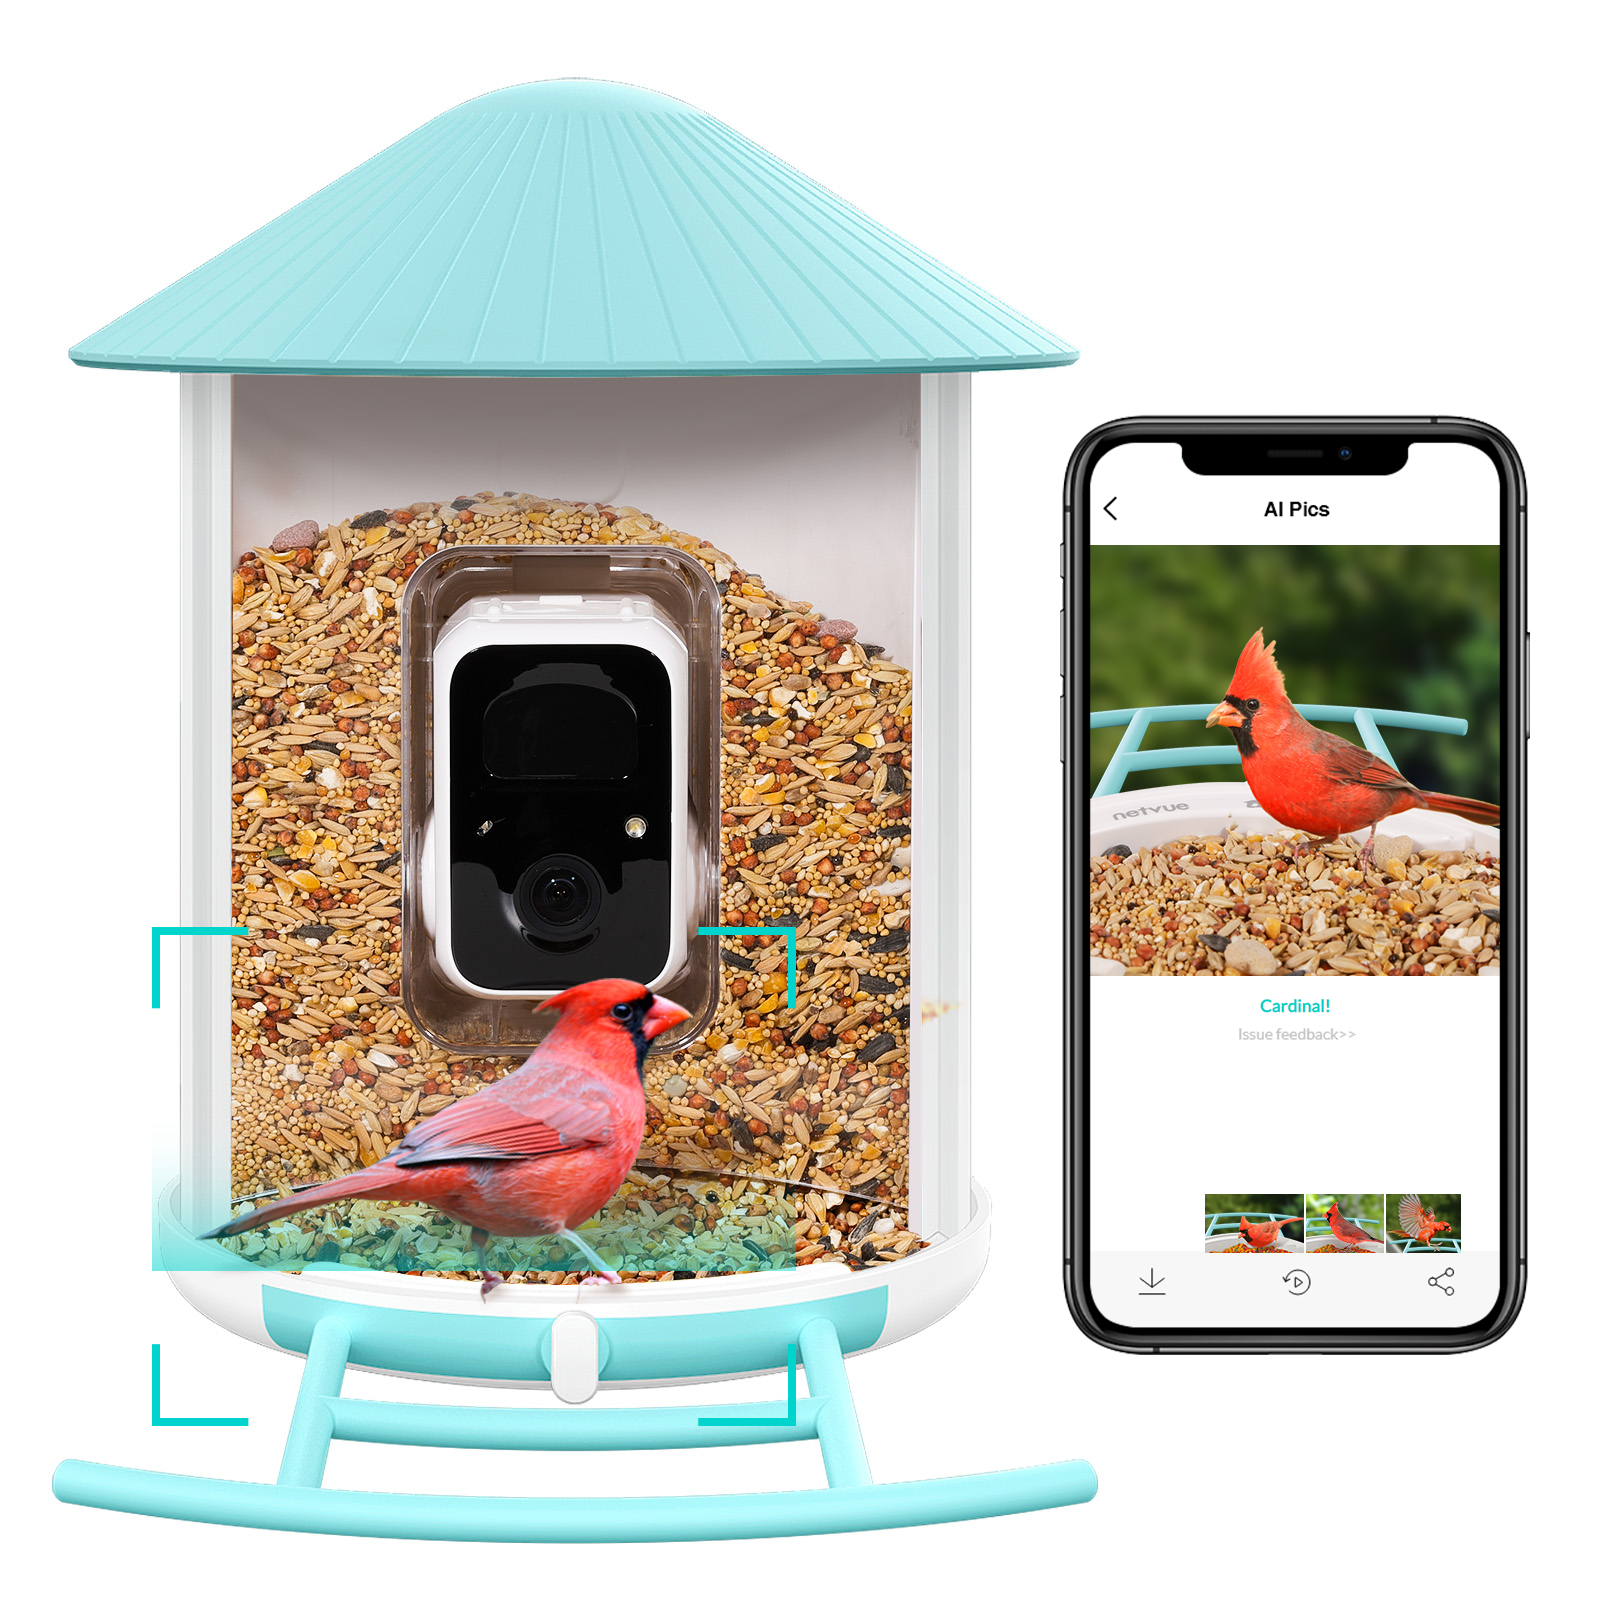 Smart Bird Feeder with Camera, Netvue Birdfy Bird Watching Camera Gift for Parents and Bird Lover, Blue (Free AI) - image 1 of 8